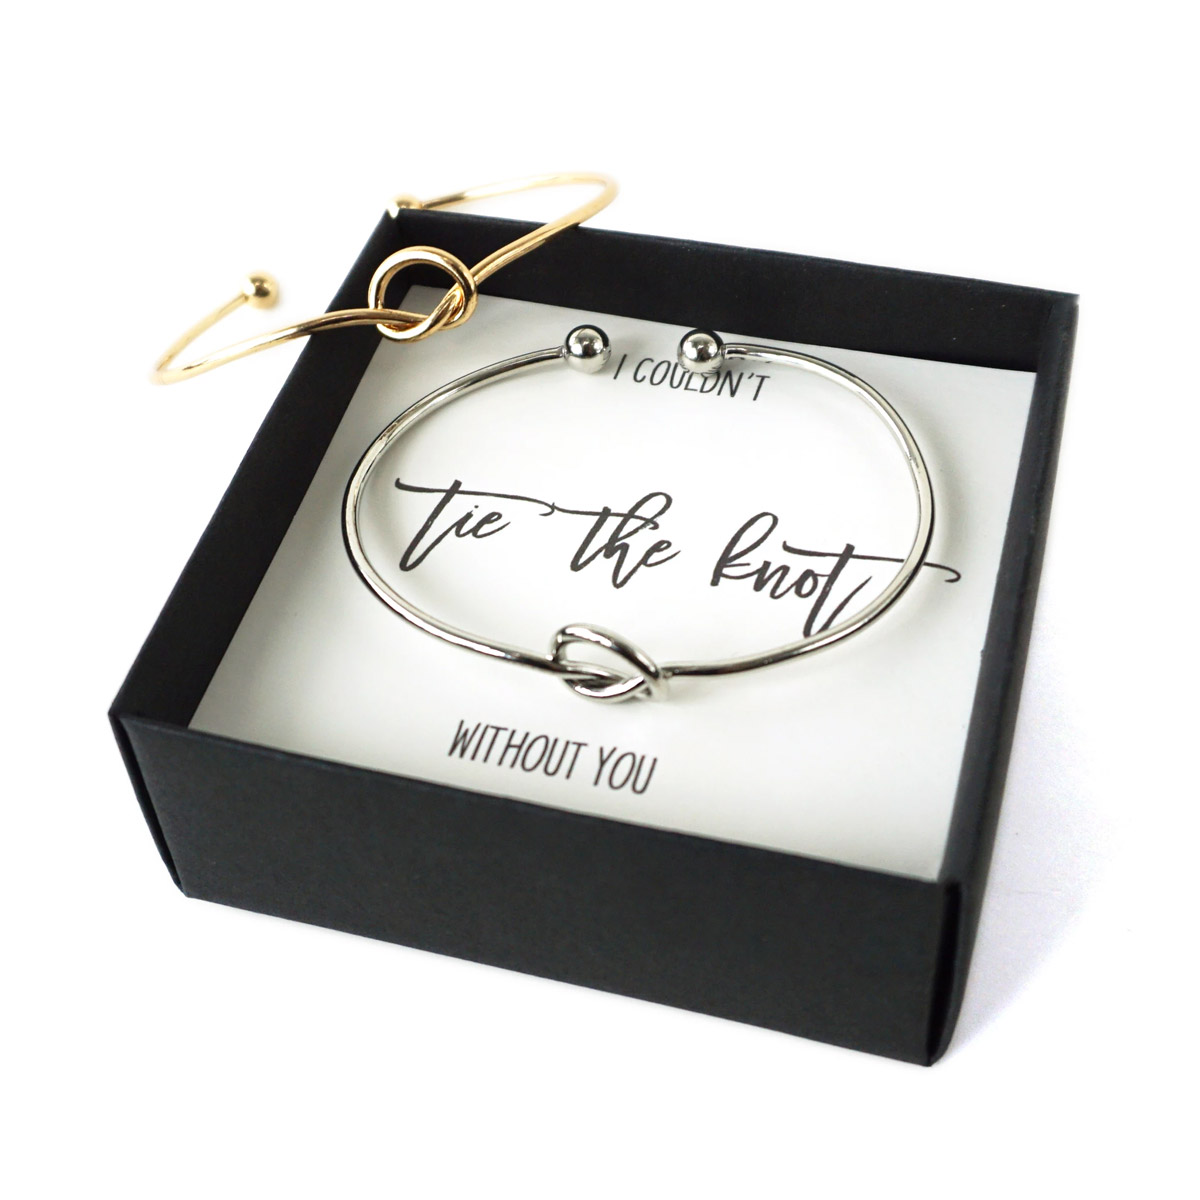 6 Bridesmaid Proposal Gift Ideas to Pop The Question to Your Friends